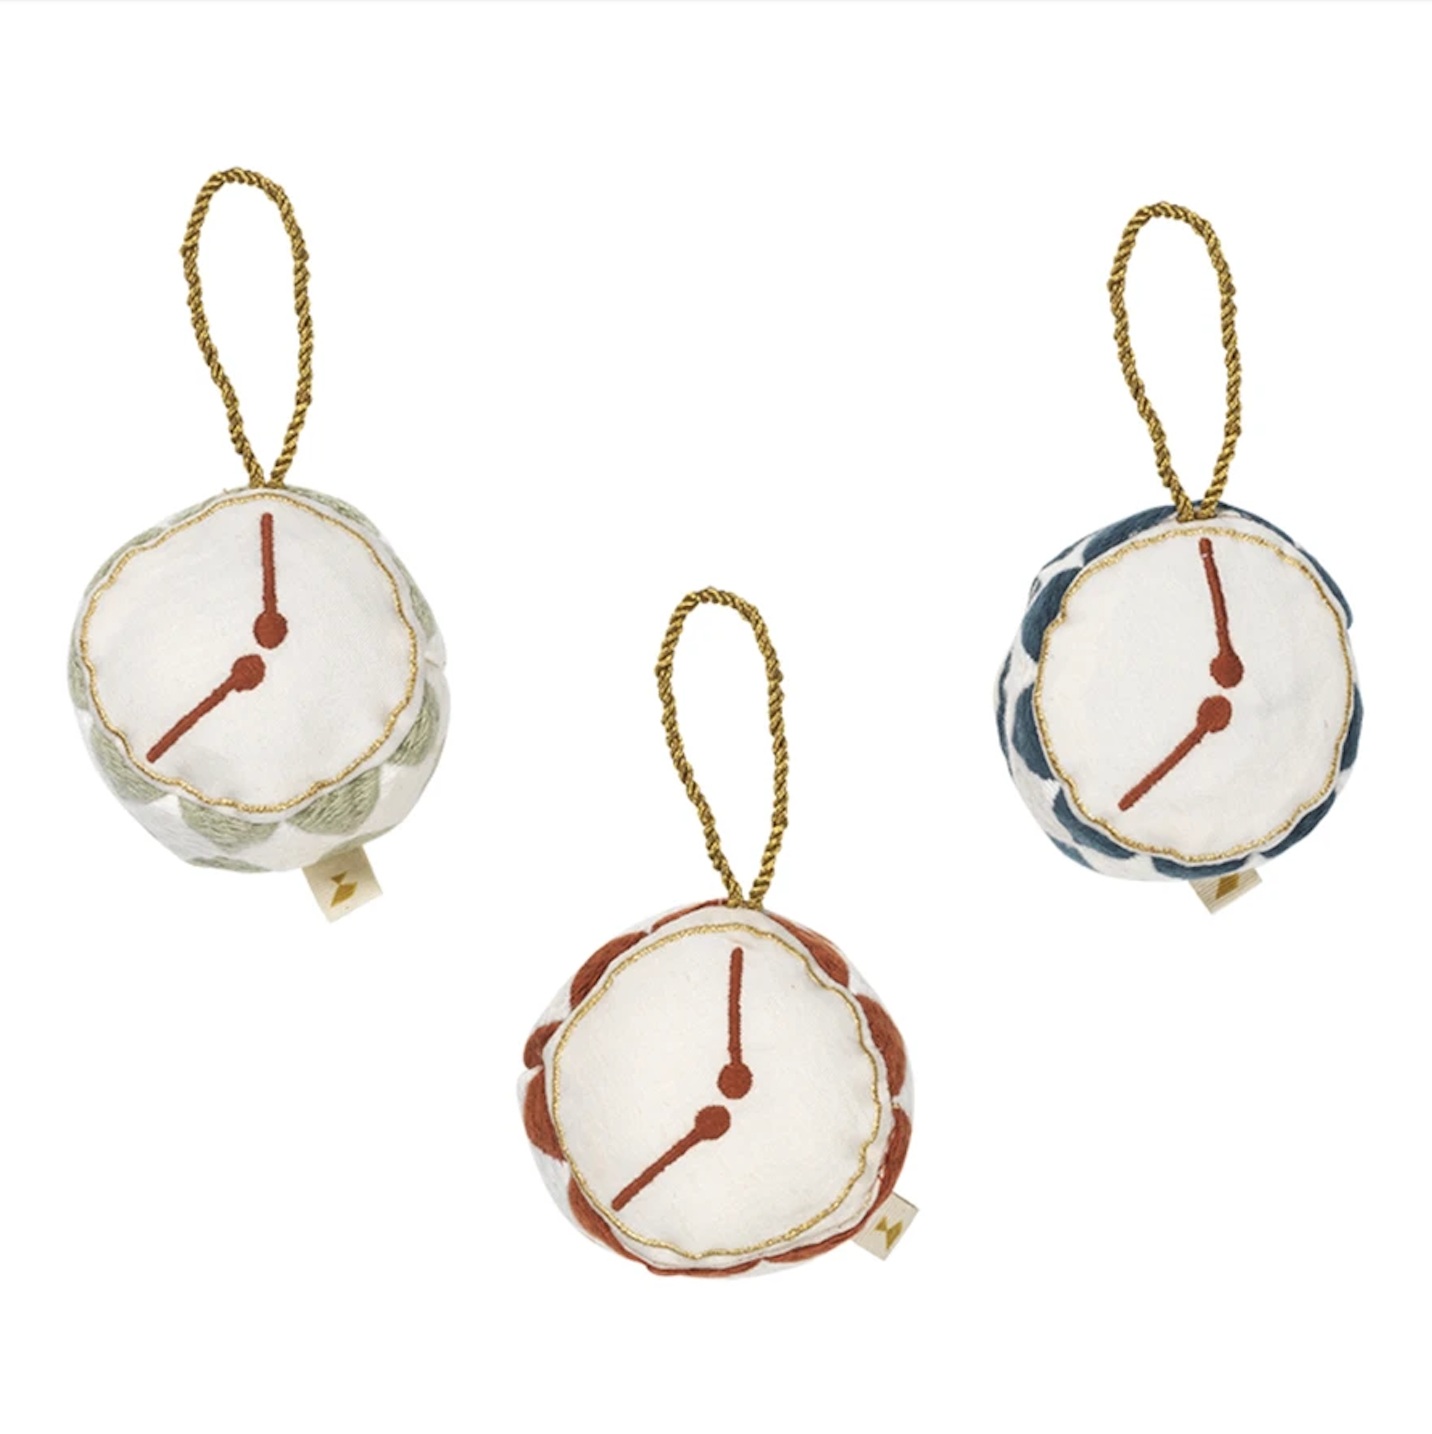 Christmas Hanging Ornaments Set of 3 - Drum